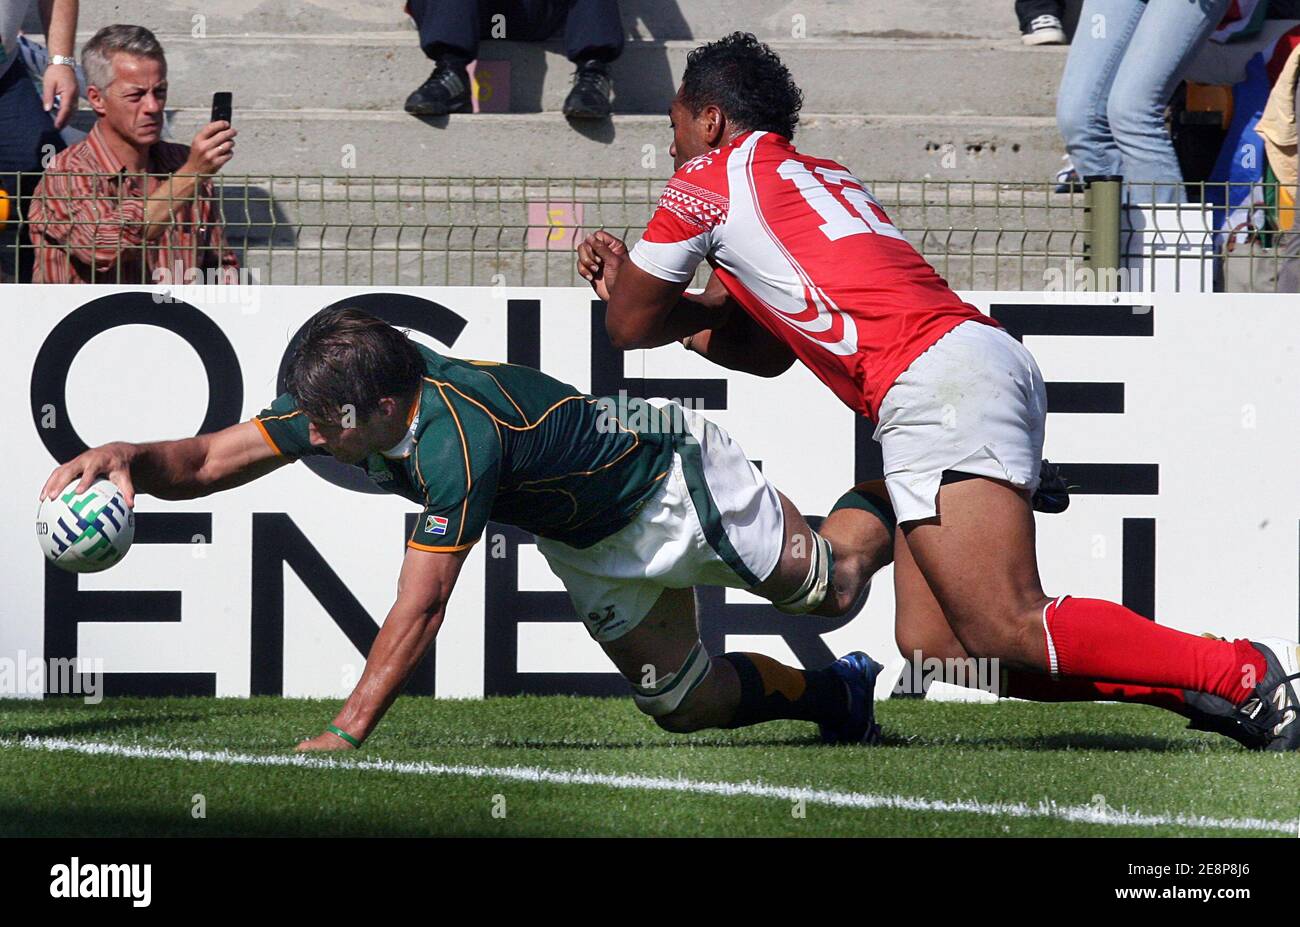 South Africa's captain Bobby Skinstad scores a try during the IRB Rugby World Cup 2007, Pool A, South Africa vs Tonga at the Bollaert stadium in Lens, France on September 22, 2007. Photo by Mehdi Taamallah/Cameleon/ABACAPRESS.COM Stock Photo